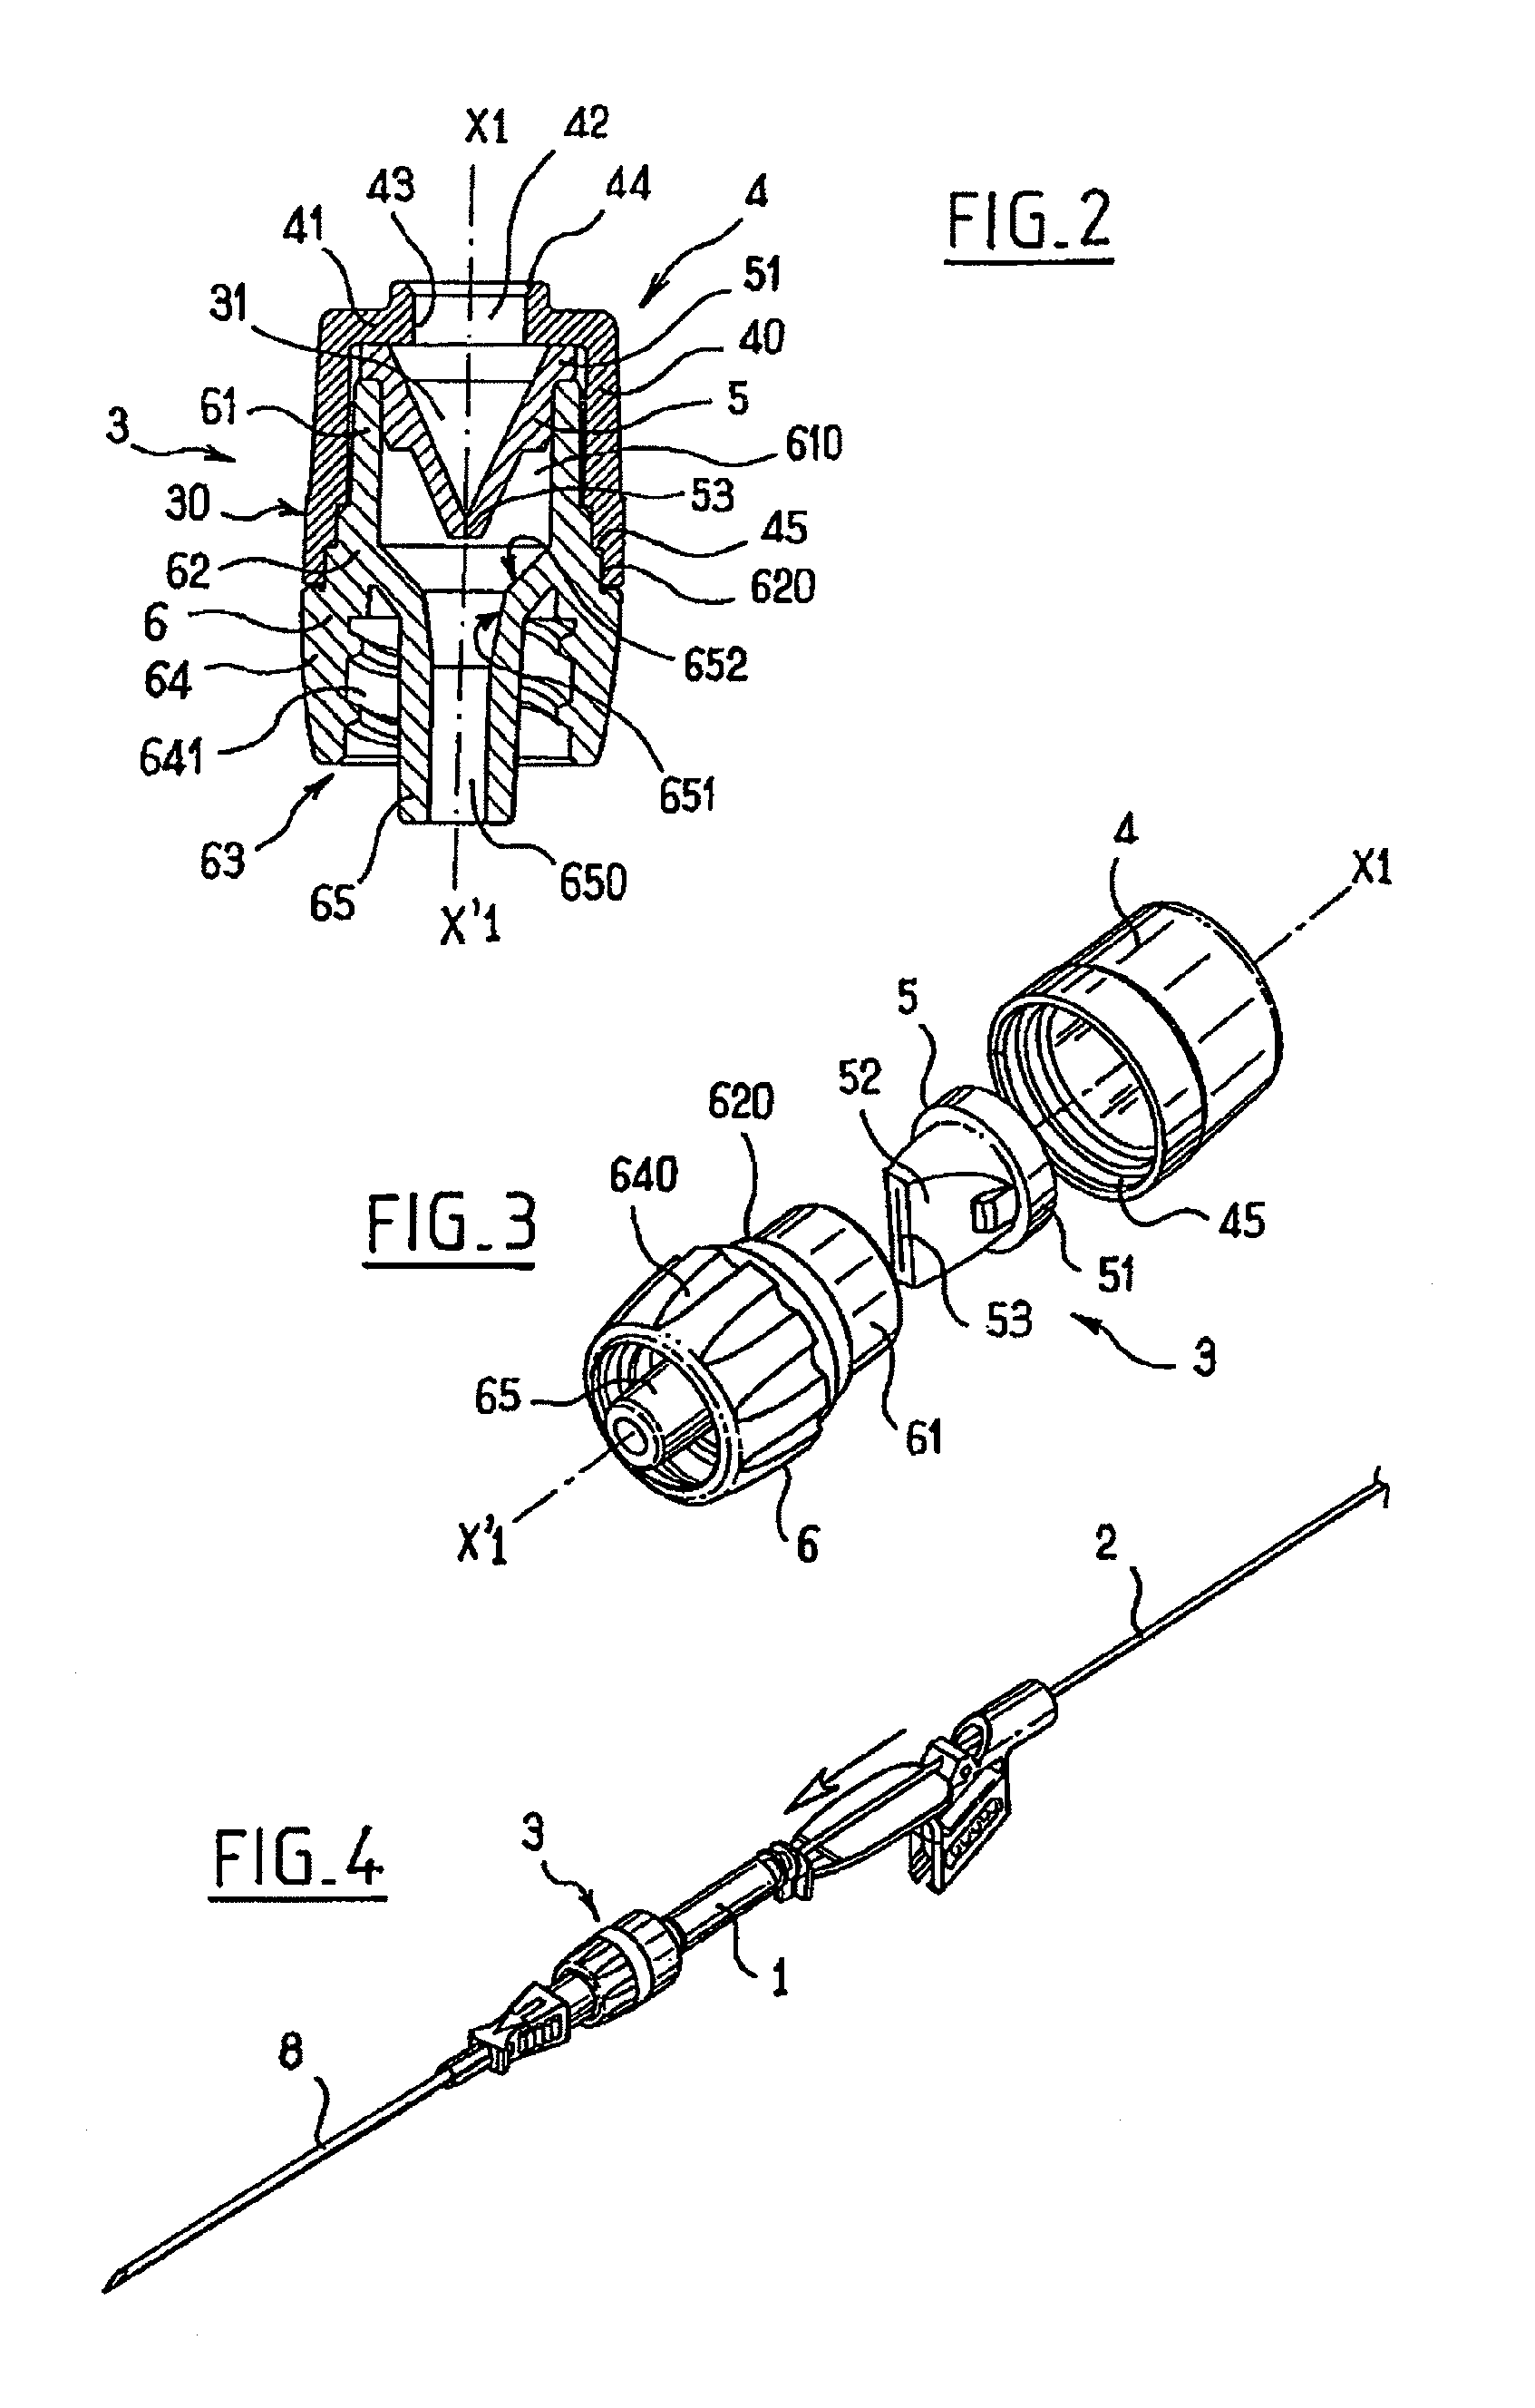 Device for introducing a catheter guide wire into a vessel